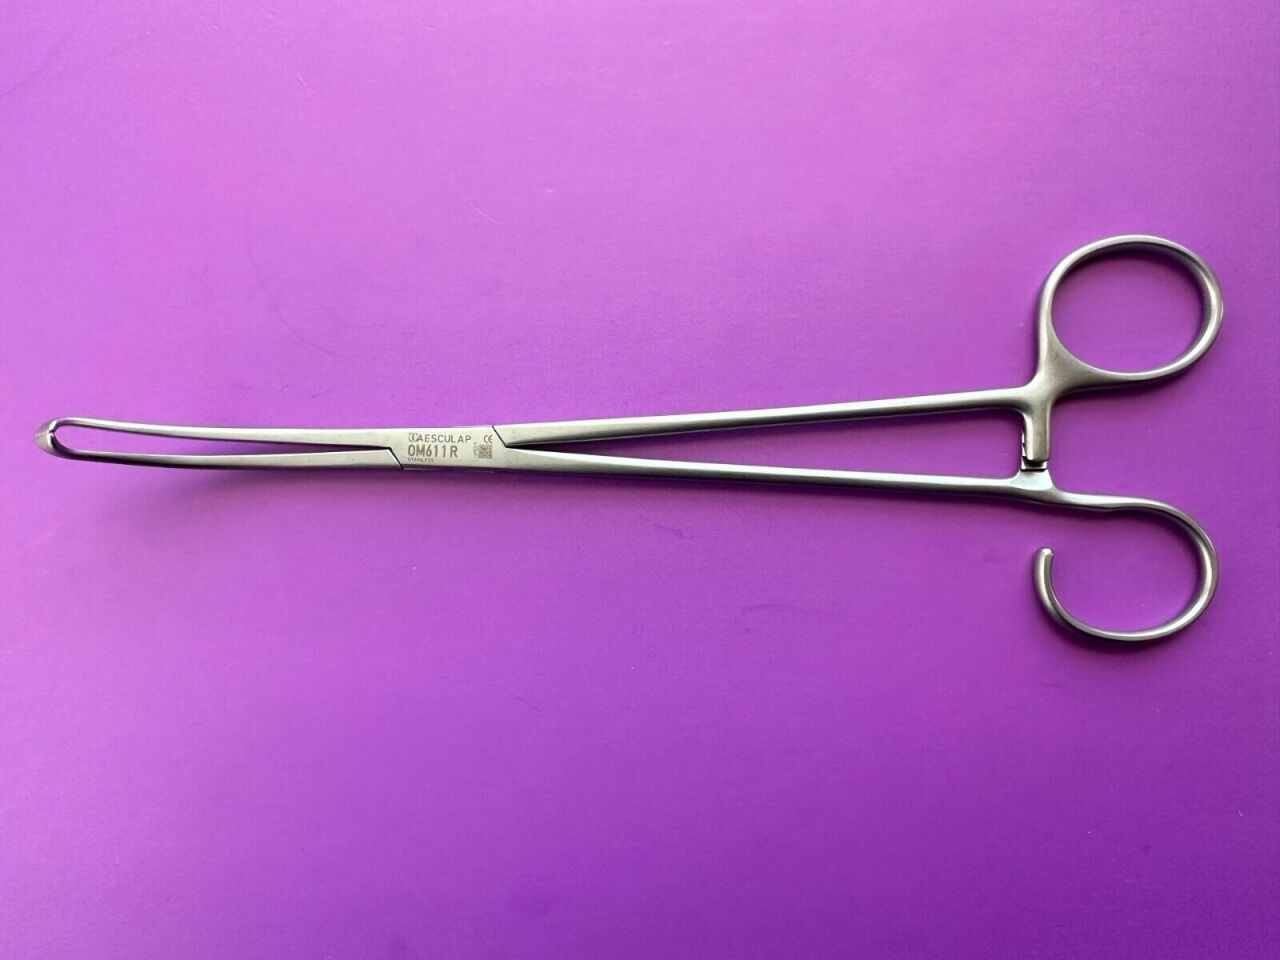 Colver Tonsil Seizing Forceps 195mm